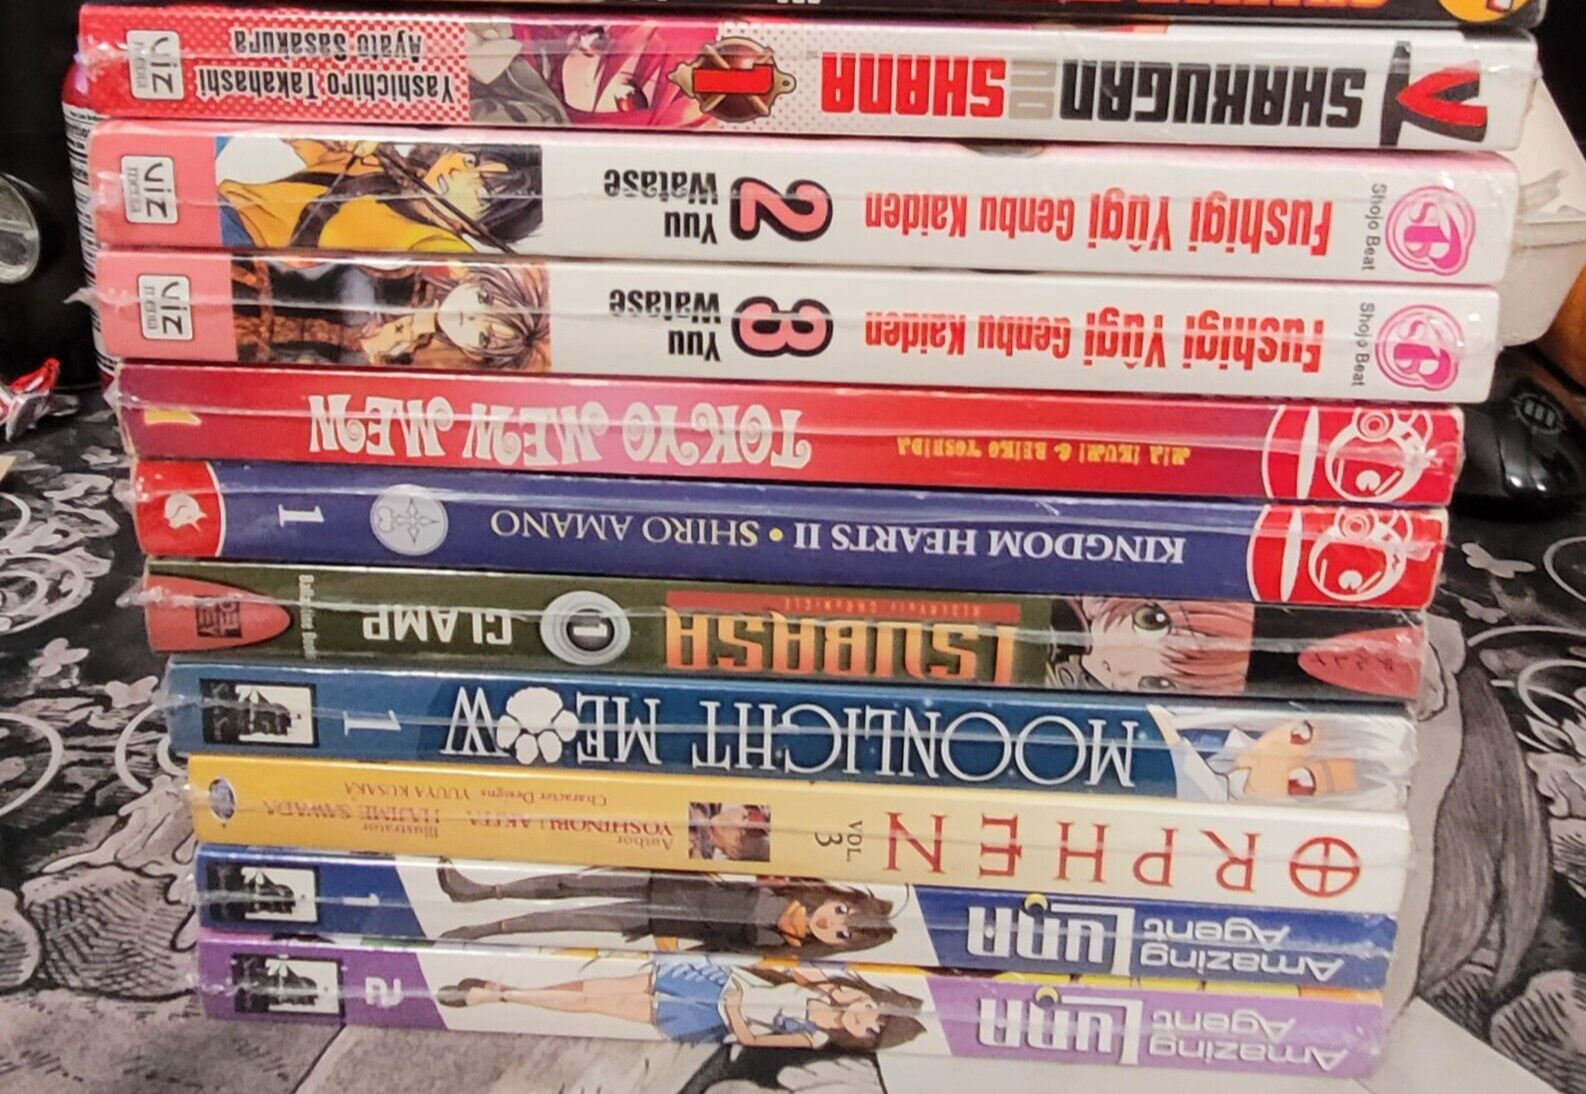 Manga lot ONLY $5 PER BOOK Good condition